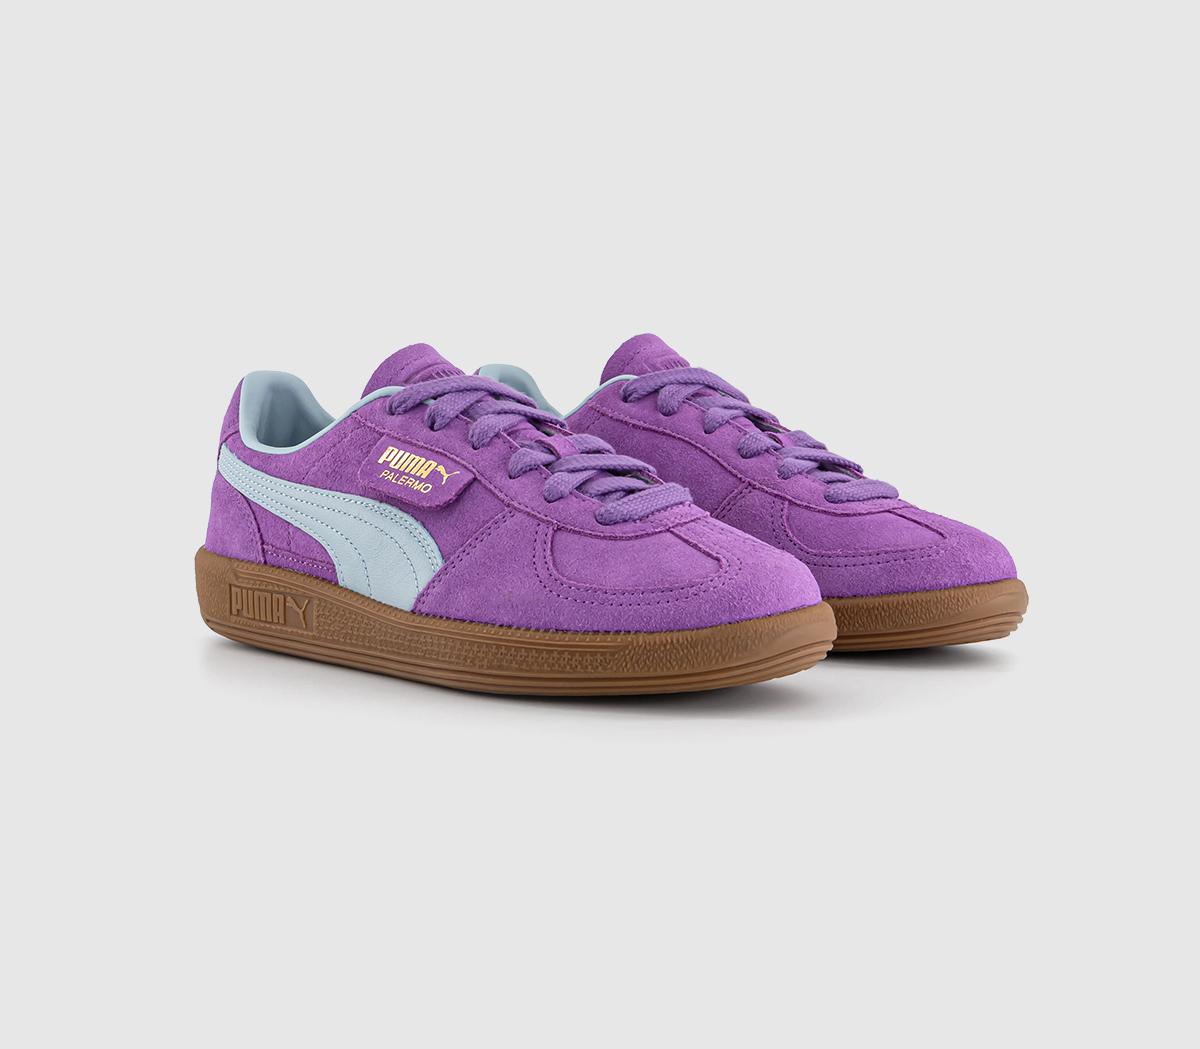 Puma Womens Palermo Trainers Ultraviolet Turquoise Surf Gold Purple, 6